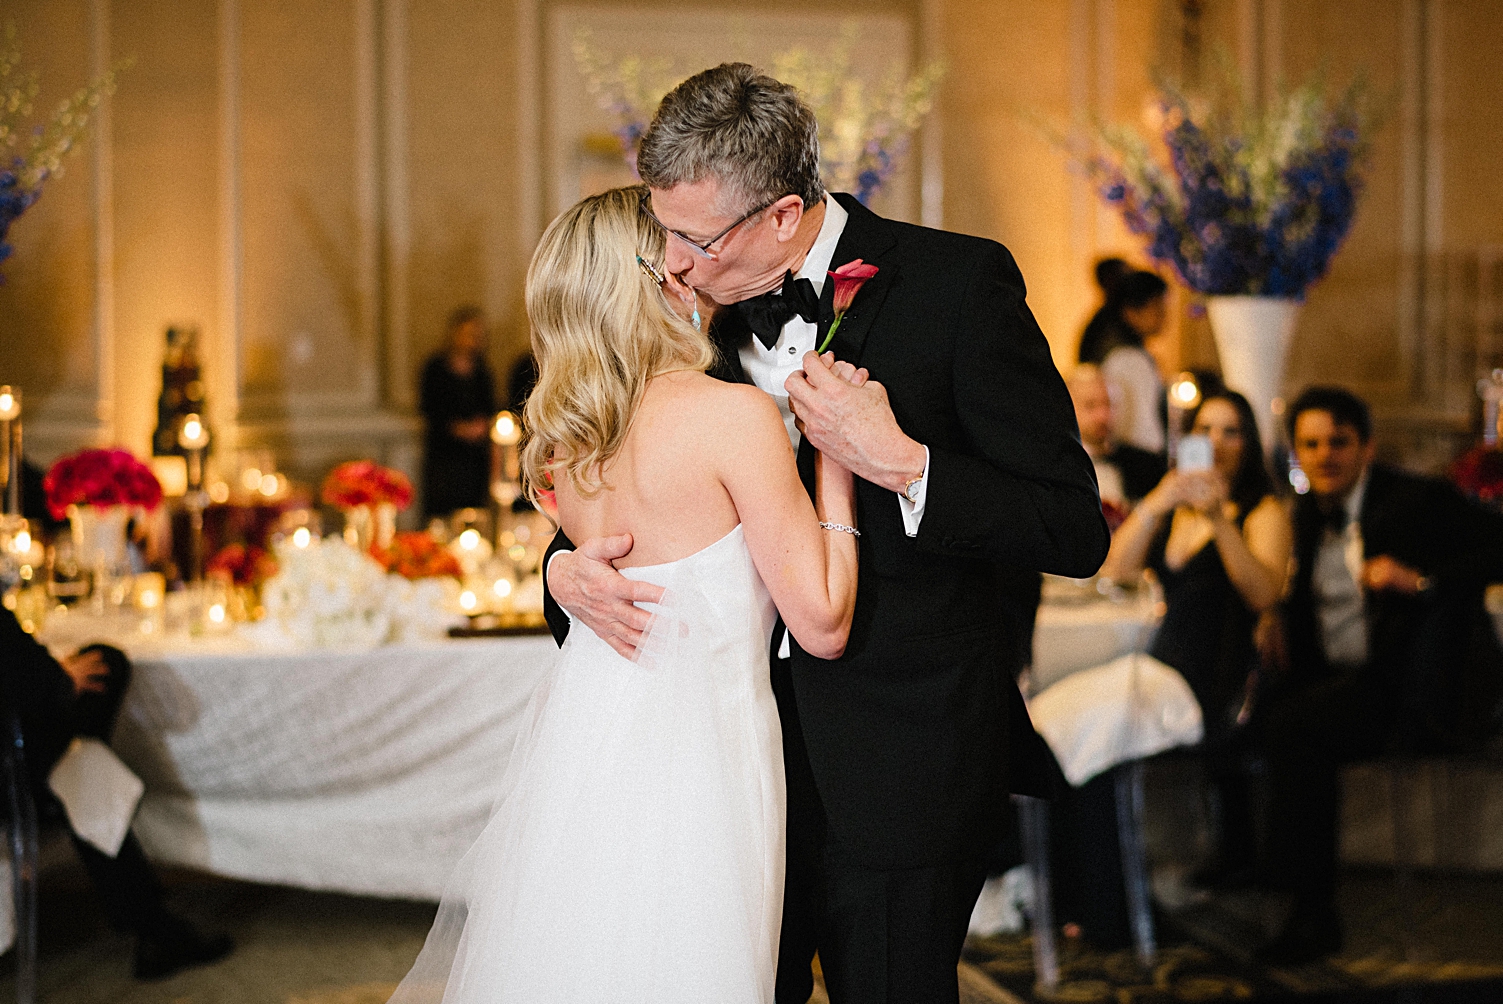 bride dancing with father at wedding reception kiss